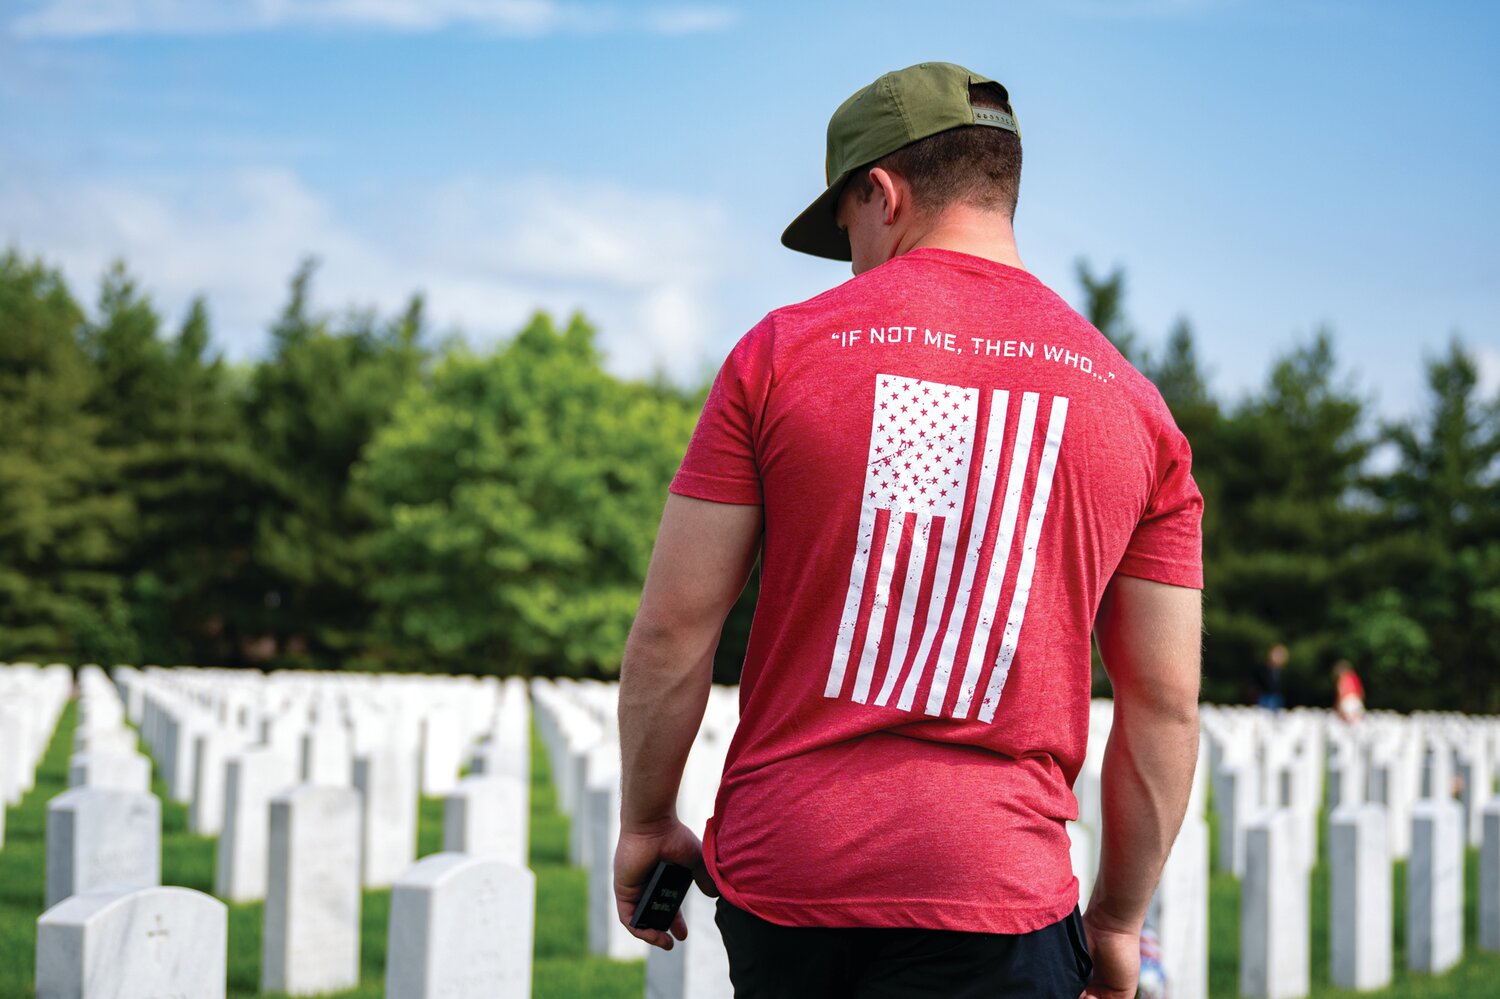 Joe Verrekia walks through Washington Crossing National Cemetery. On Memorial Day, the Travis Manion Foundation hosted an Honor Project event in which volunteers placed handcrafted commemorative tokens at the resting places of fallen heroes.